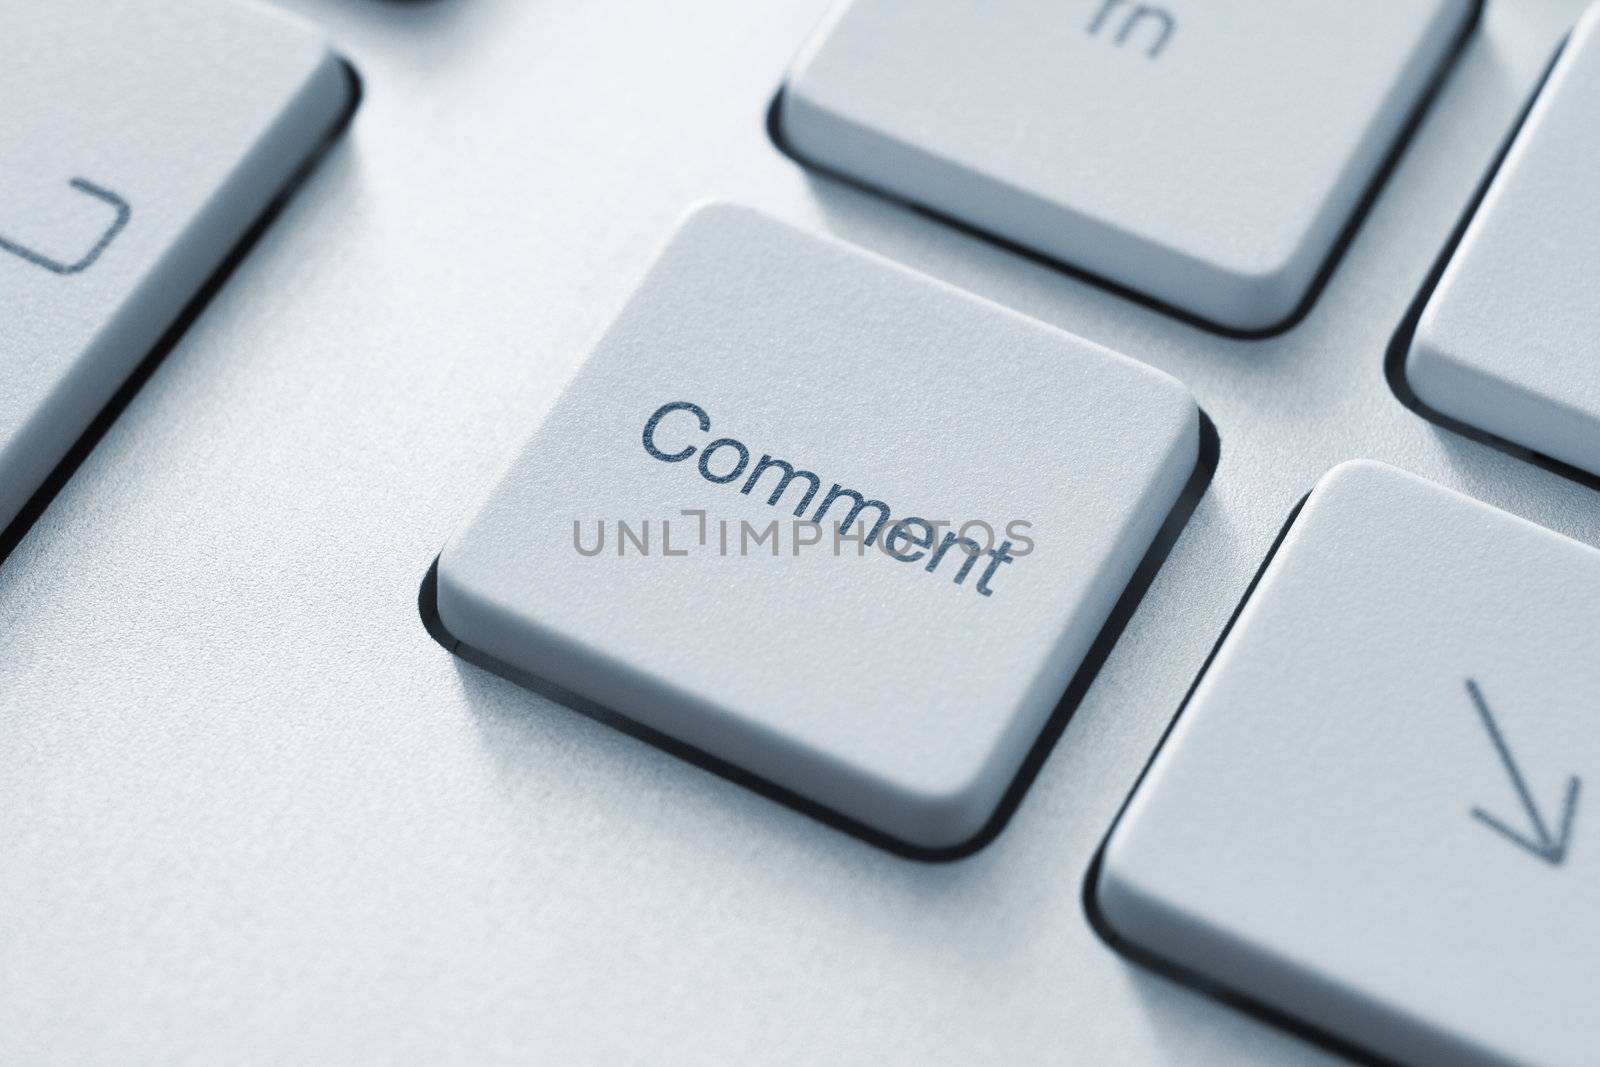 Comment button on the keyboard. Toned Image.